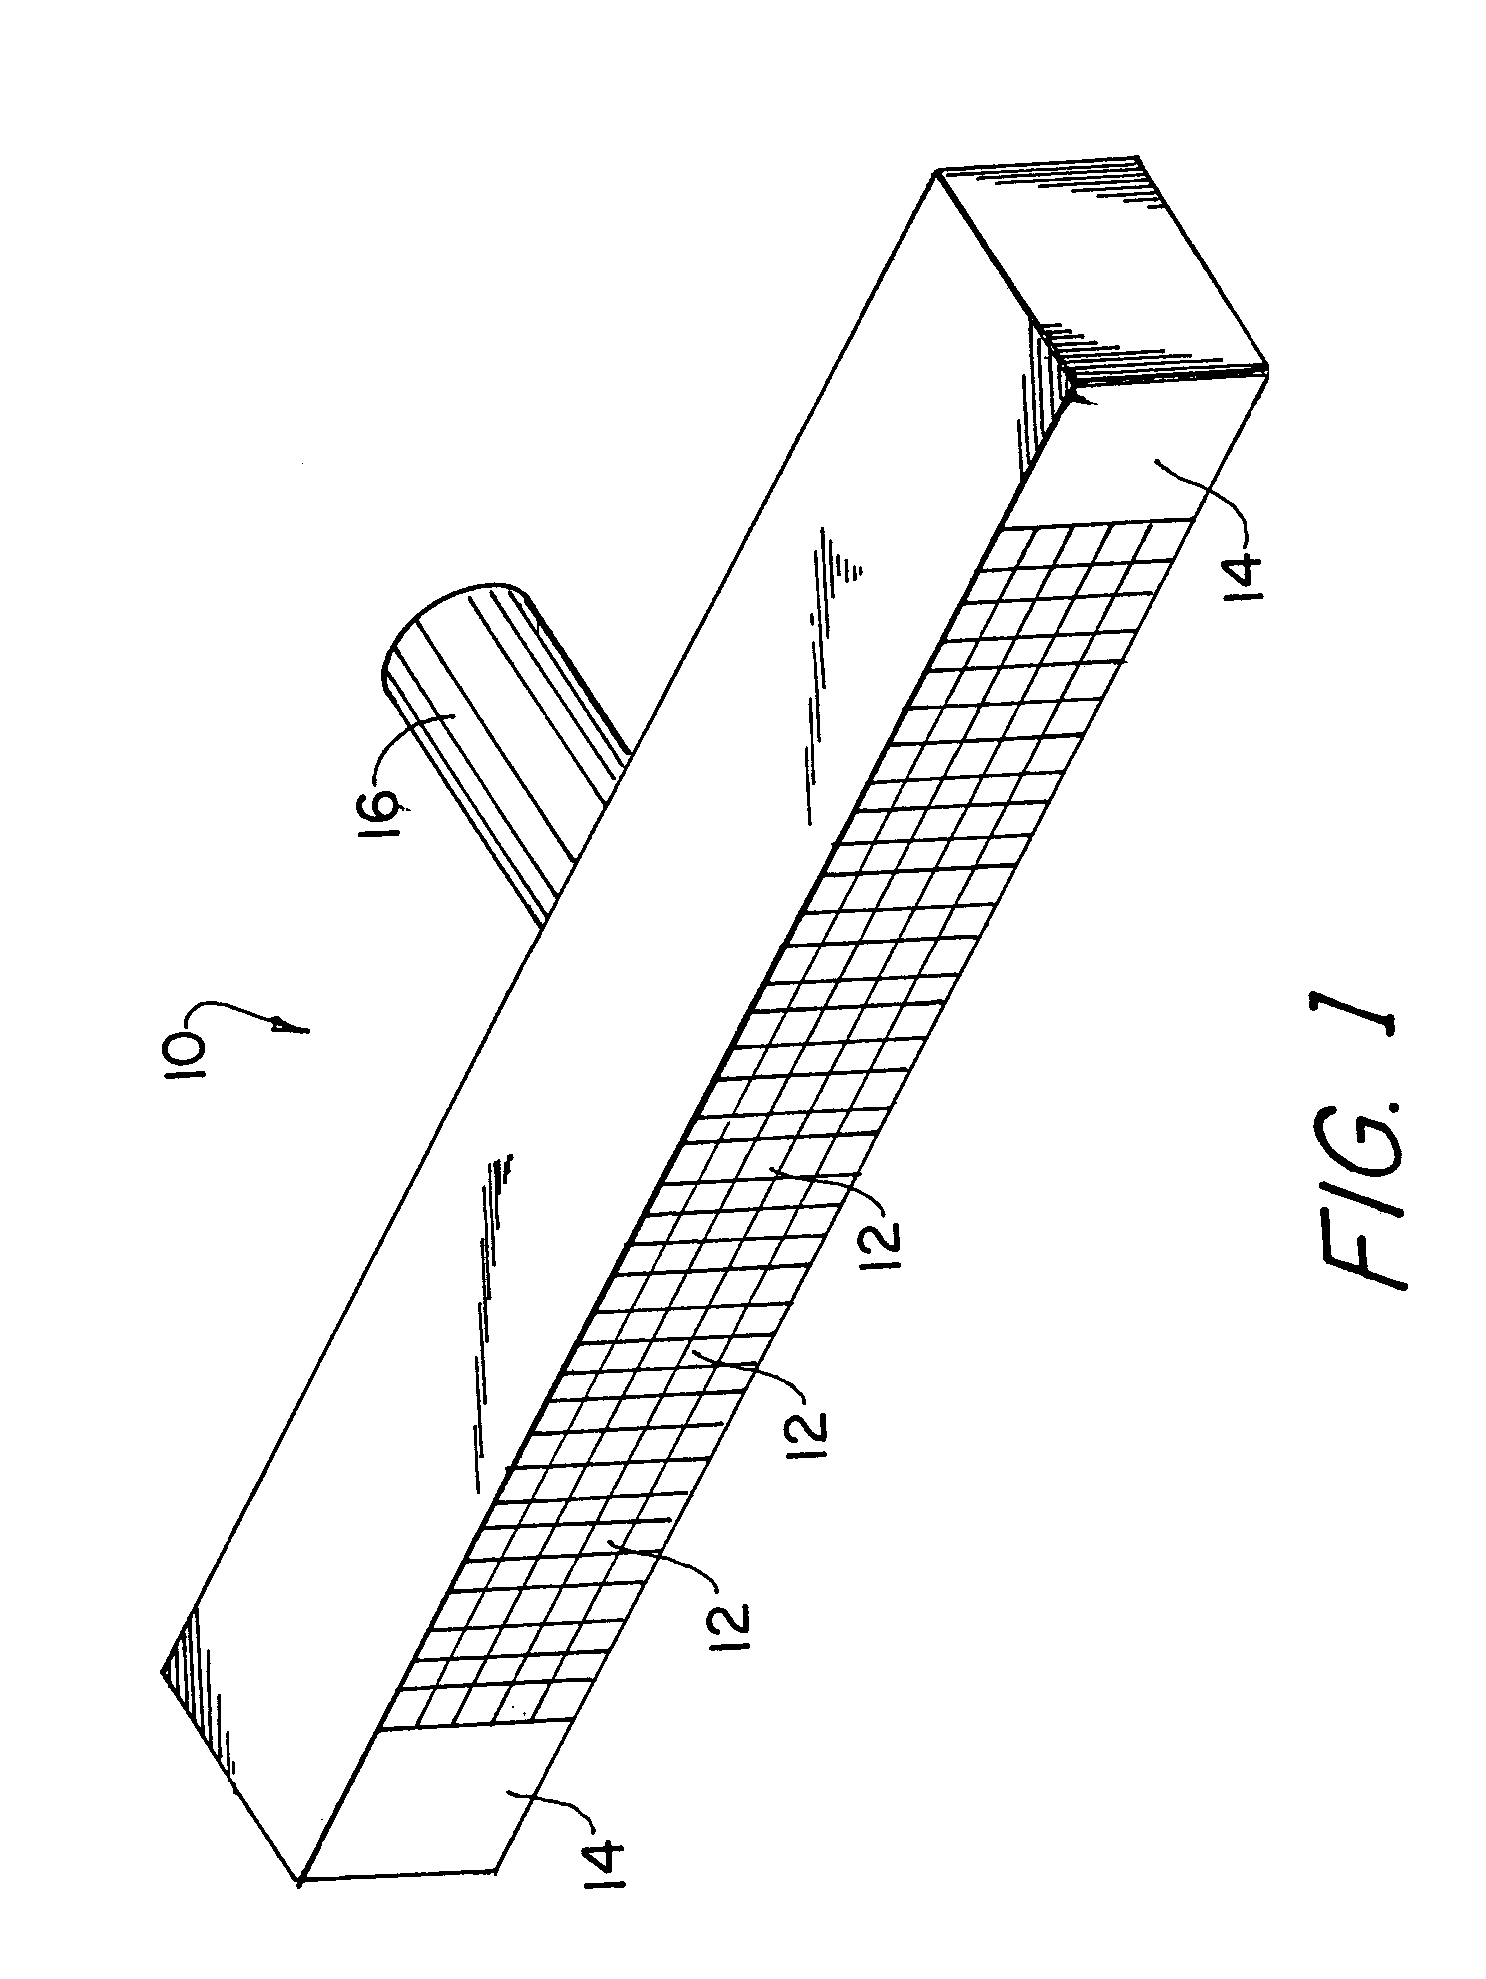 Cargo lamp assembly for vehicles